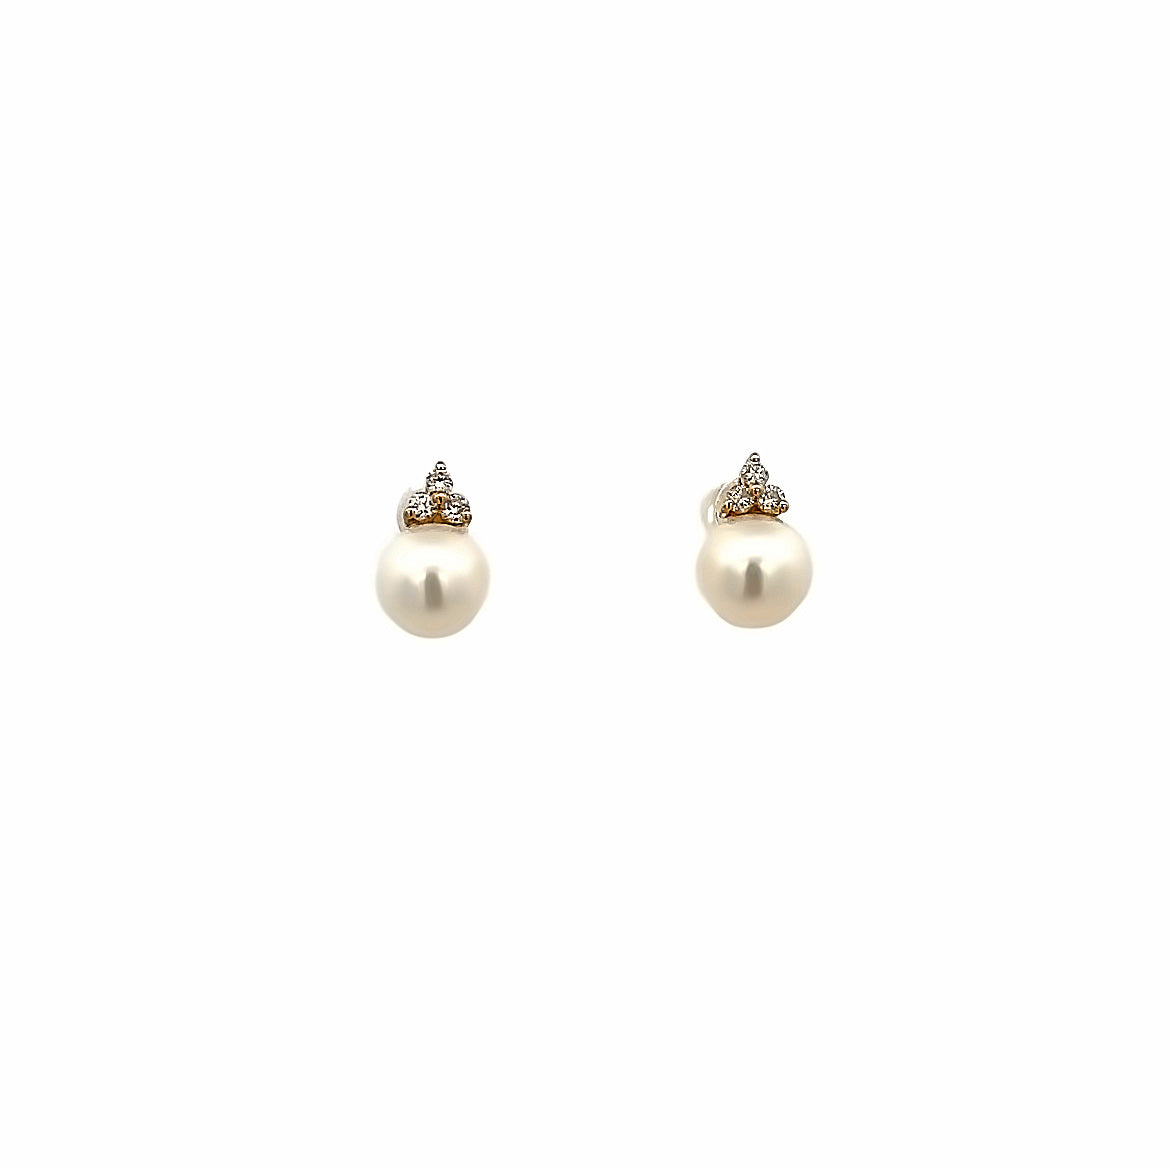 18K GOLD EARRINGS WITH PEARL AND DIAMOND